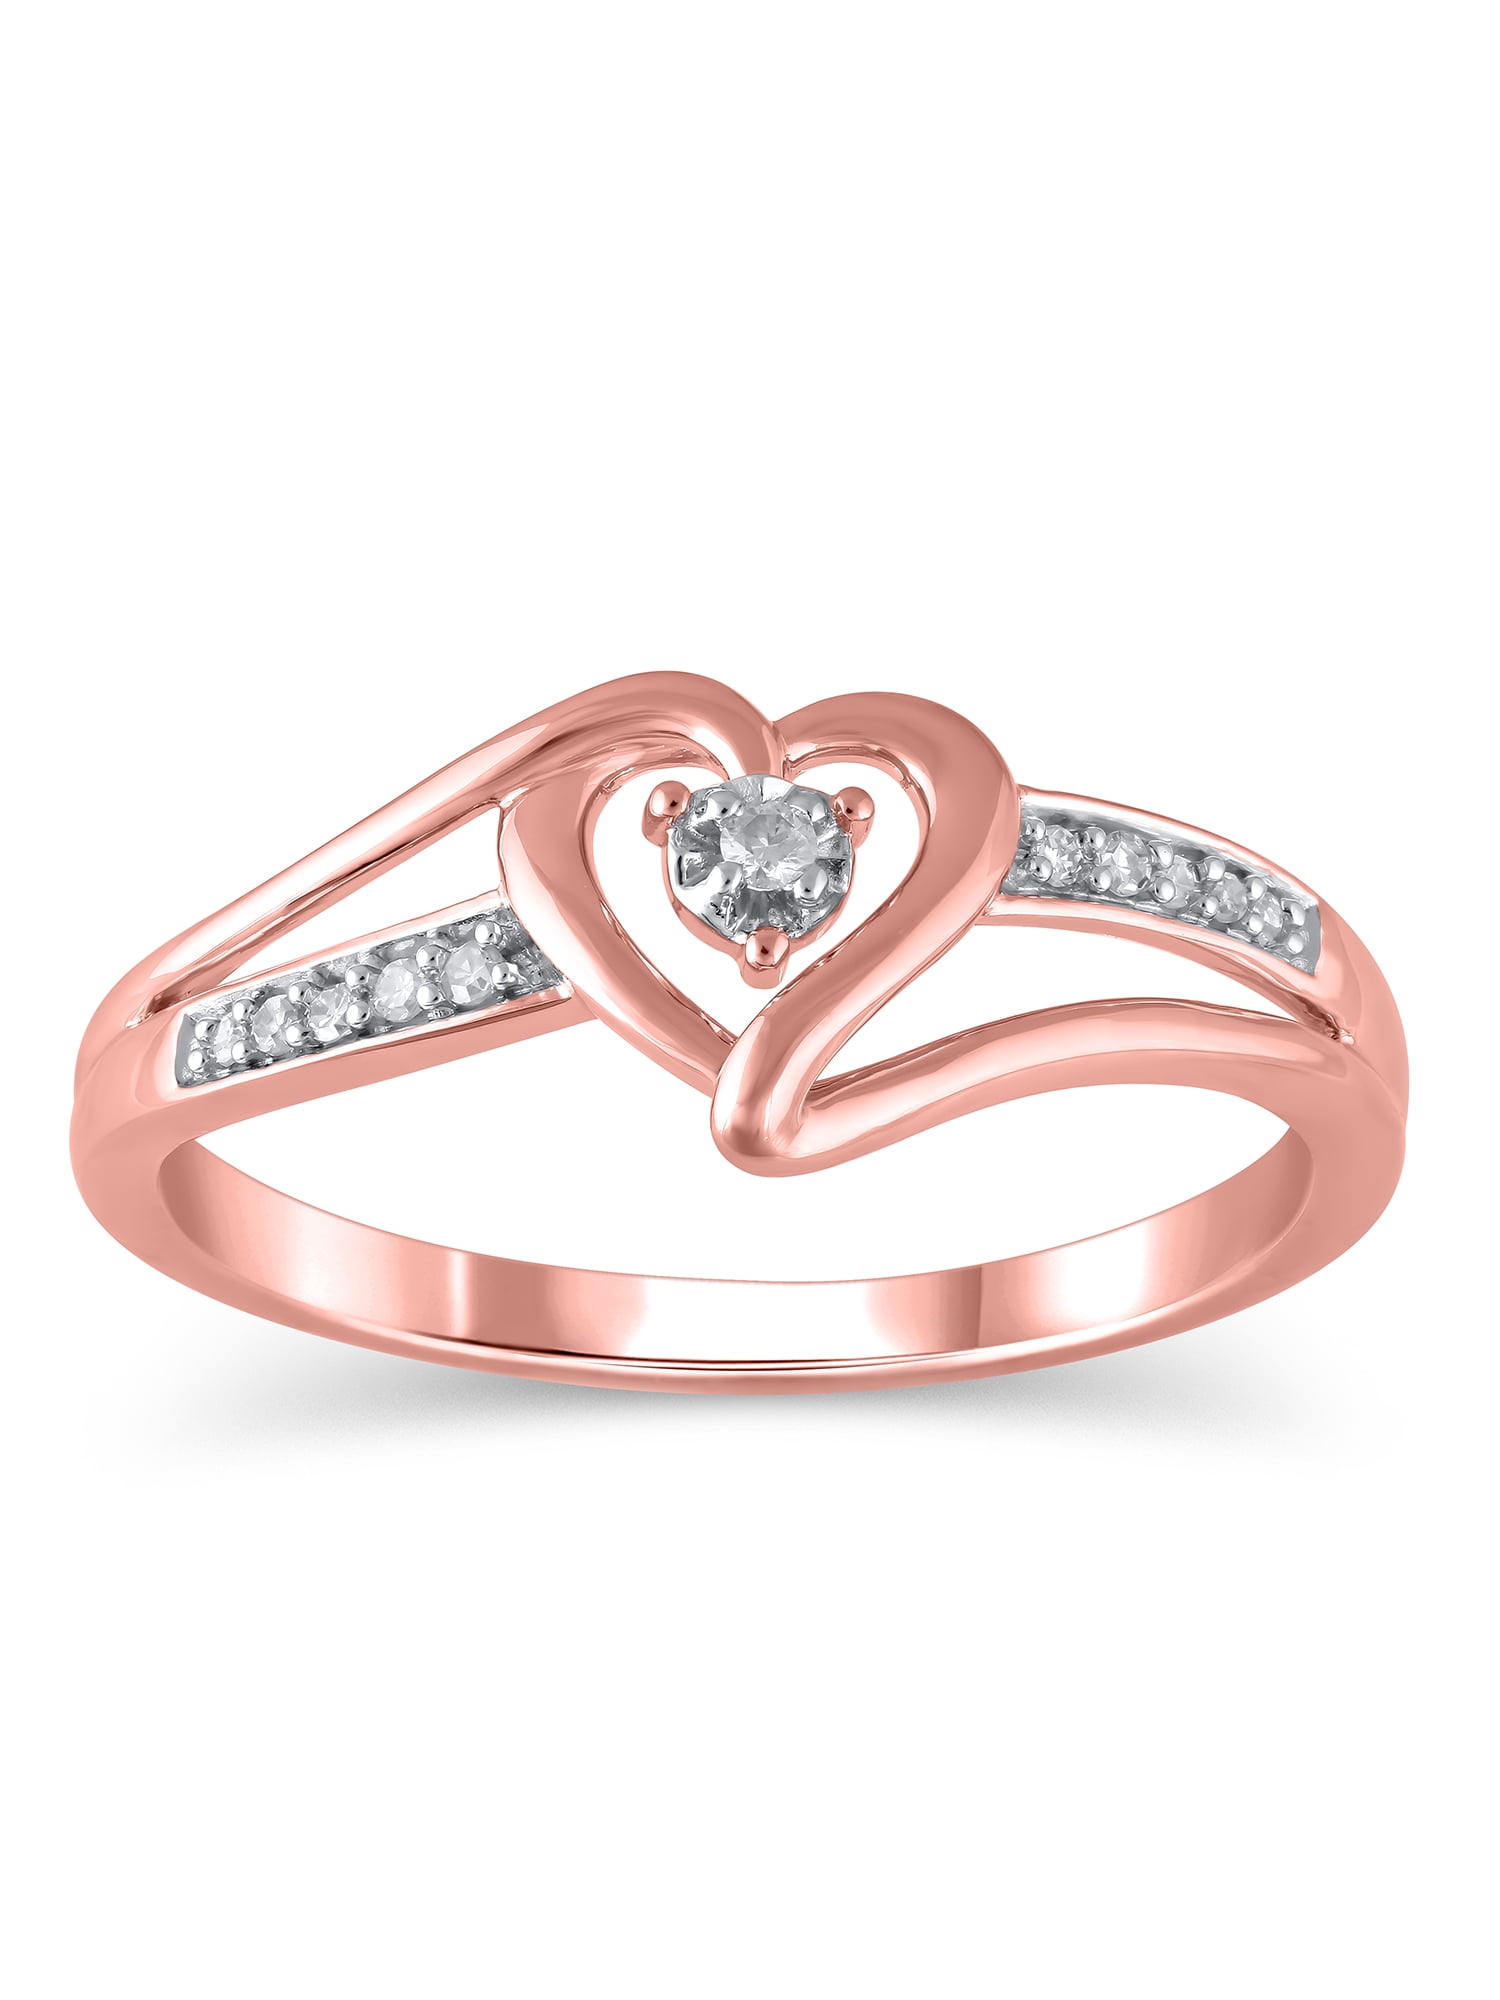 Diamond Accent (I3 clarity, J-K color) Hold My Hand Diamond Heart Promise Ring in 10kt Rose Gold, Size 7